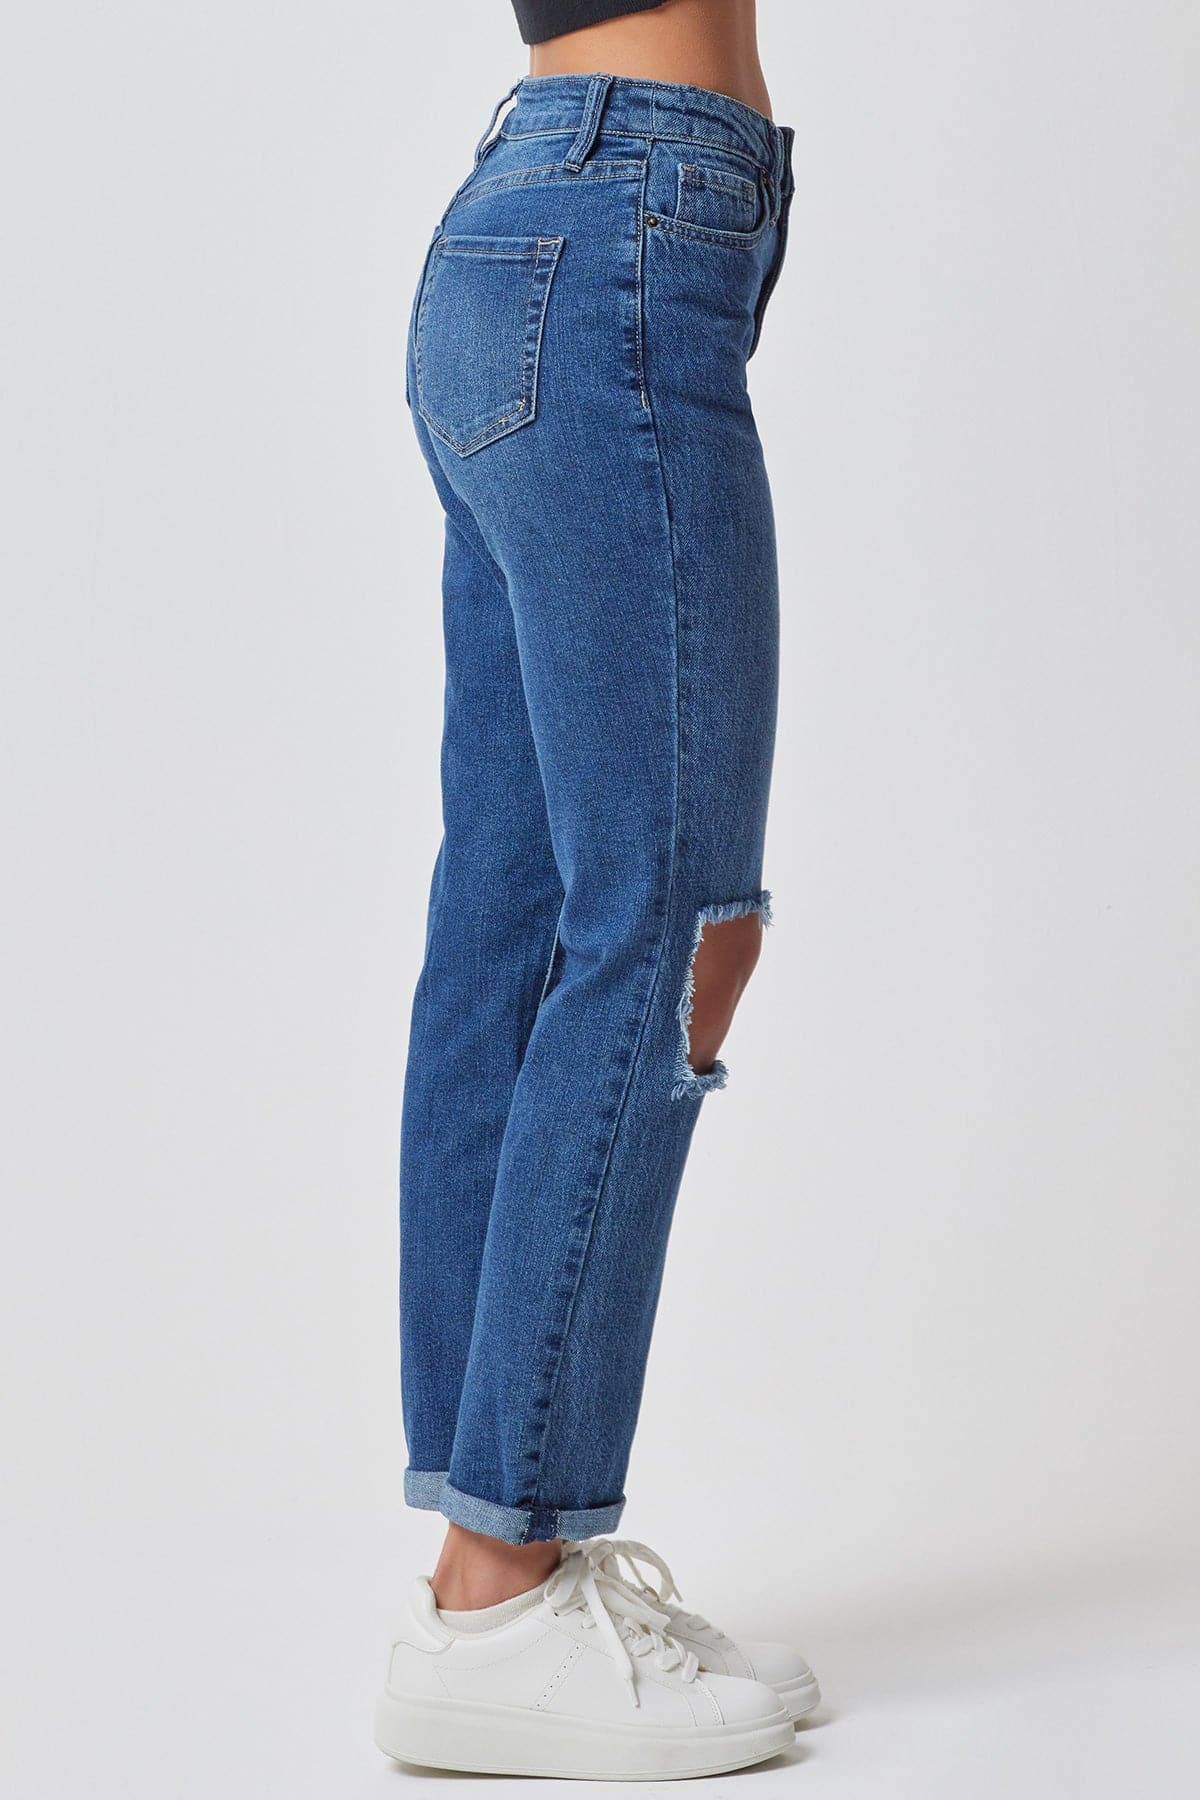 Women's Hybrid Dream Mom Fit Ankle Jeans